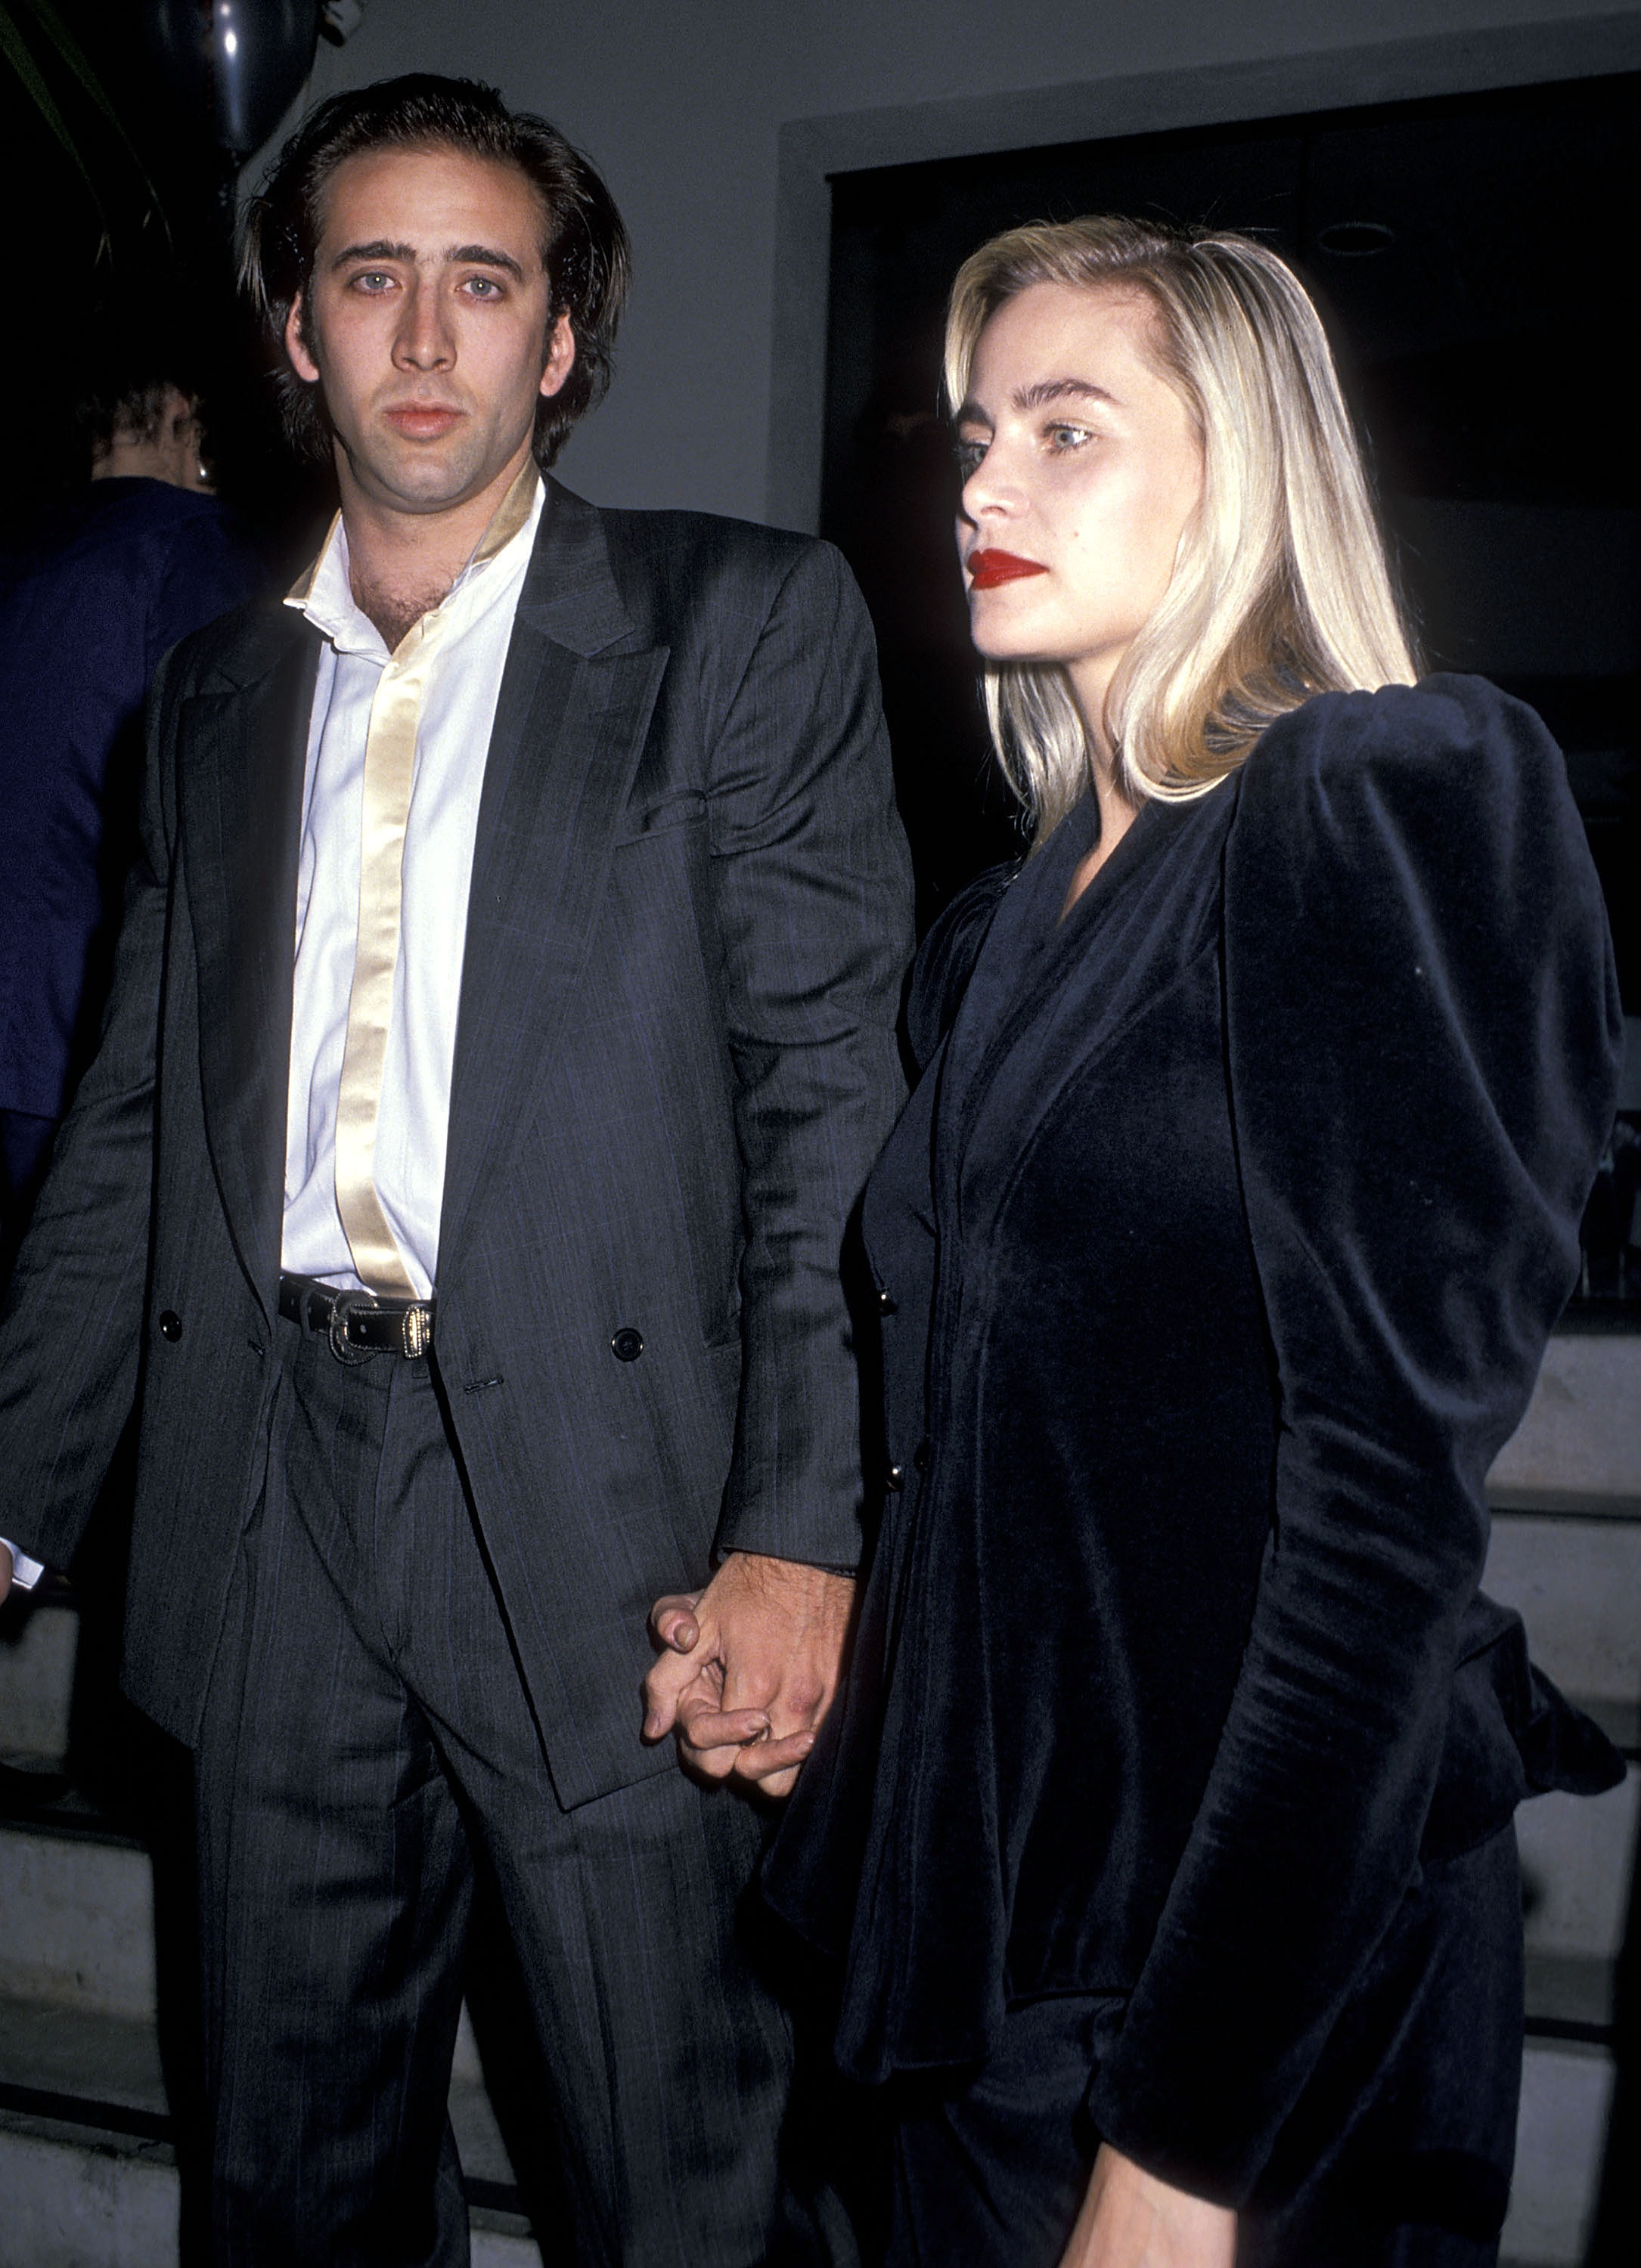 Nicolas Cage and Christina Fulton attend Michael Dukakis' Presidential Campaign Fundraiser in Los Angeles, California, on October 10, 1988. | Source: Getty Images